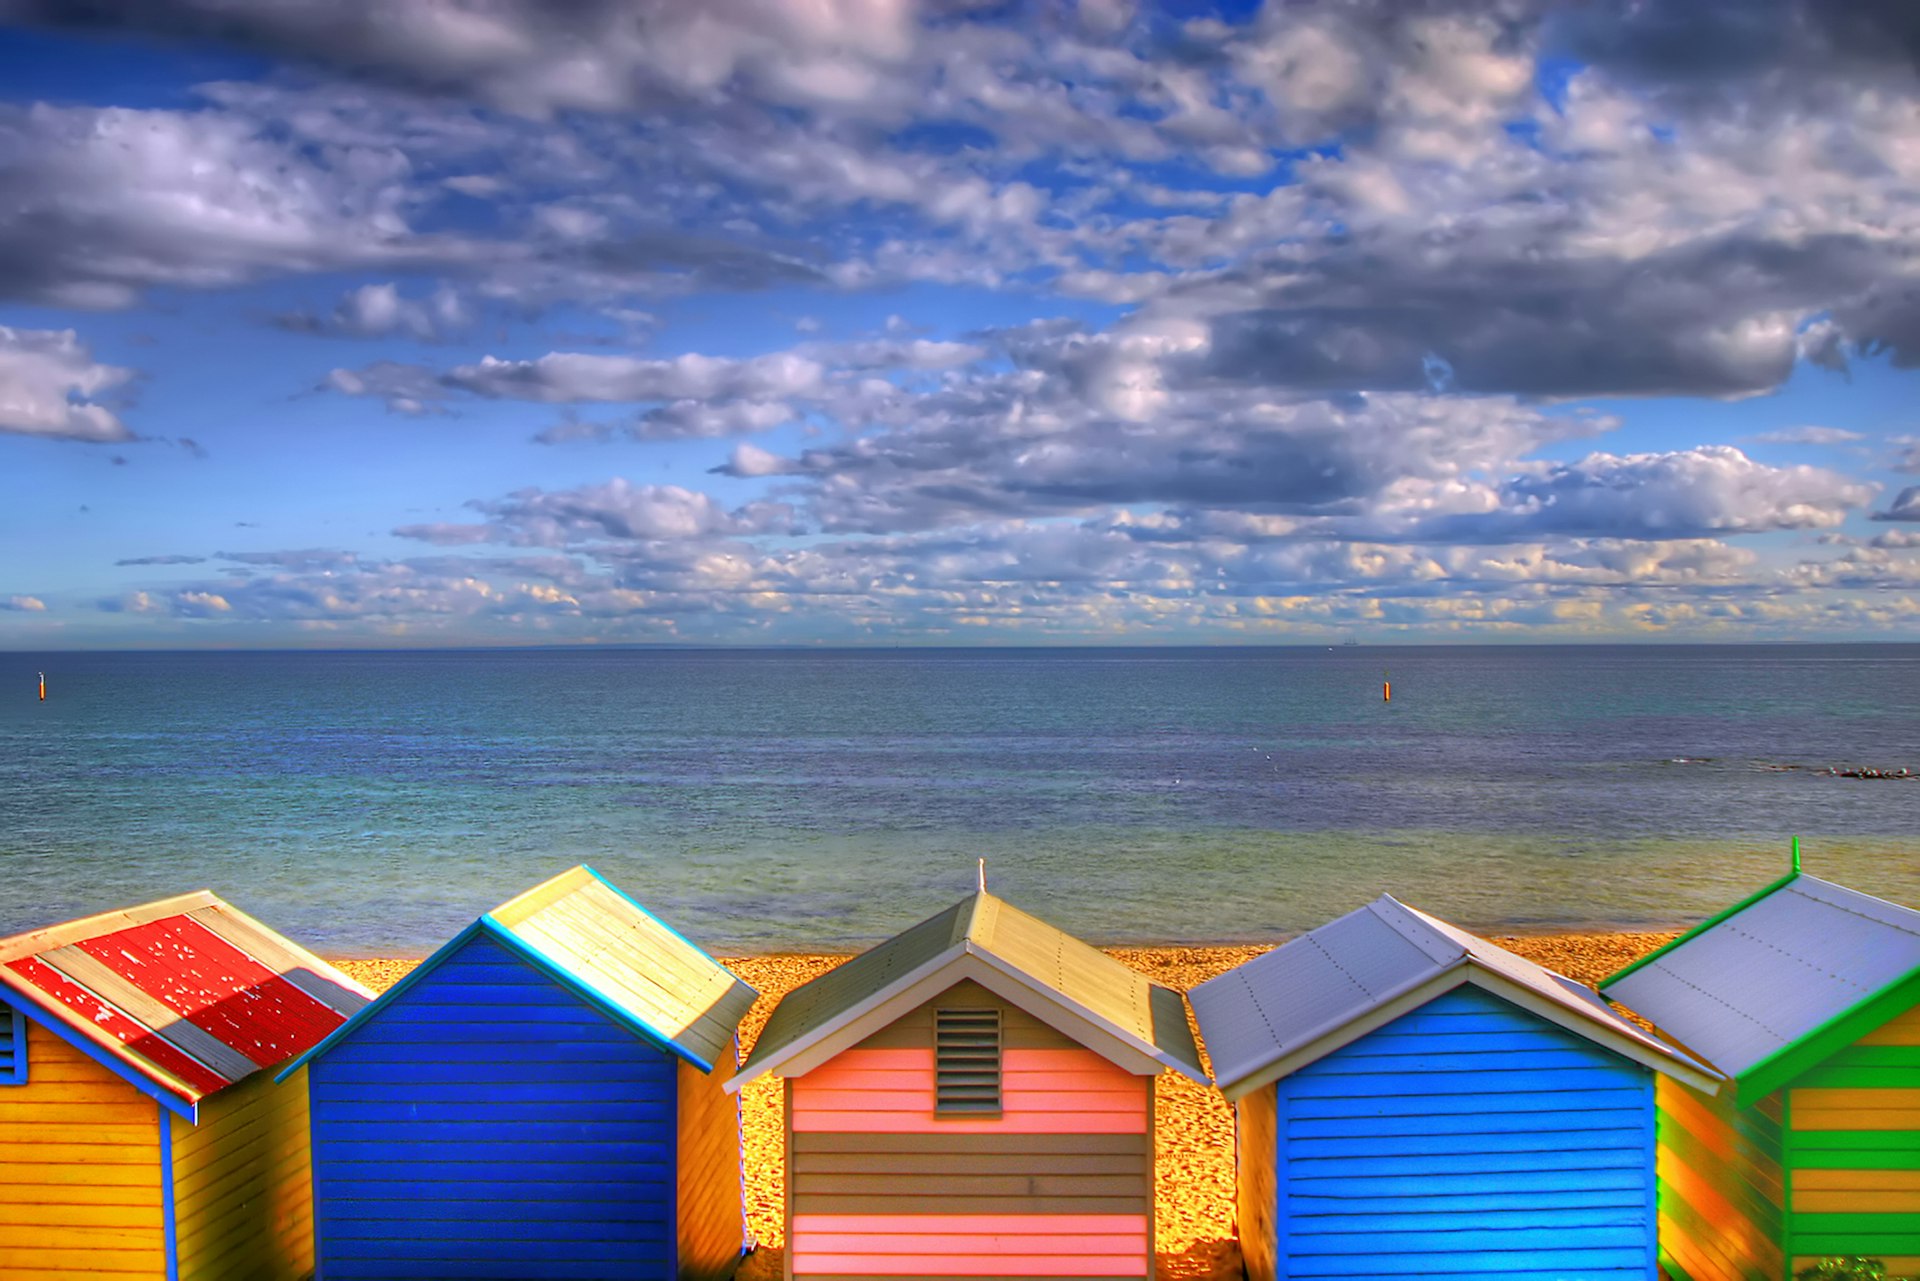 A row of colorful beach huts faces the sea